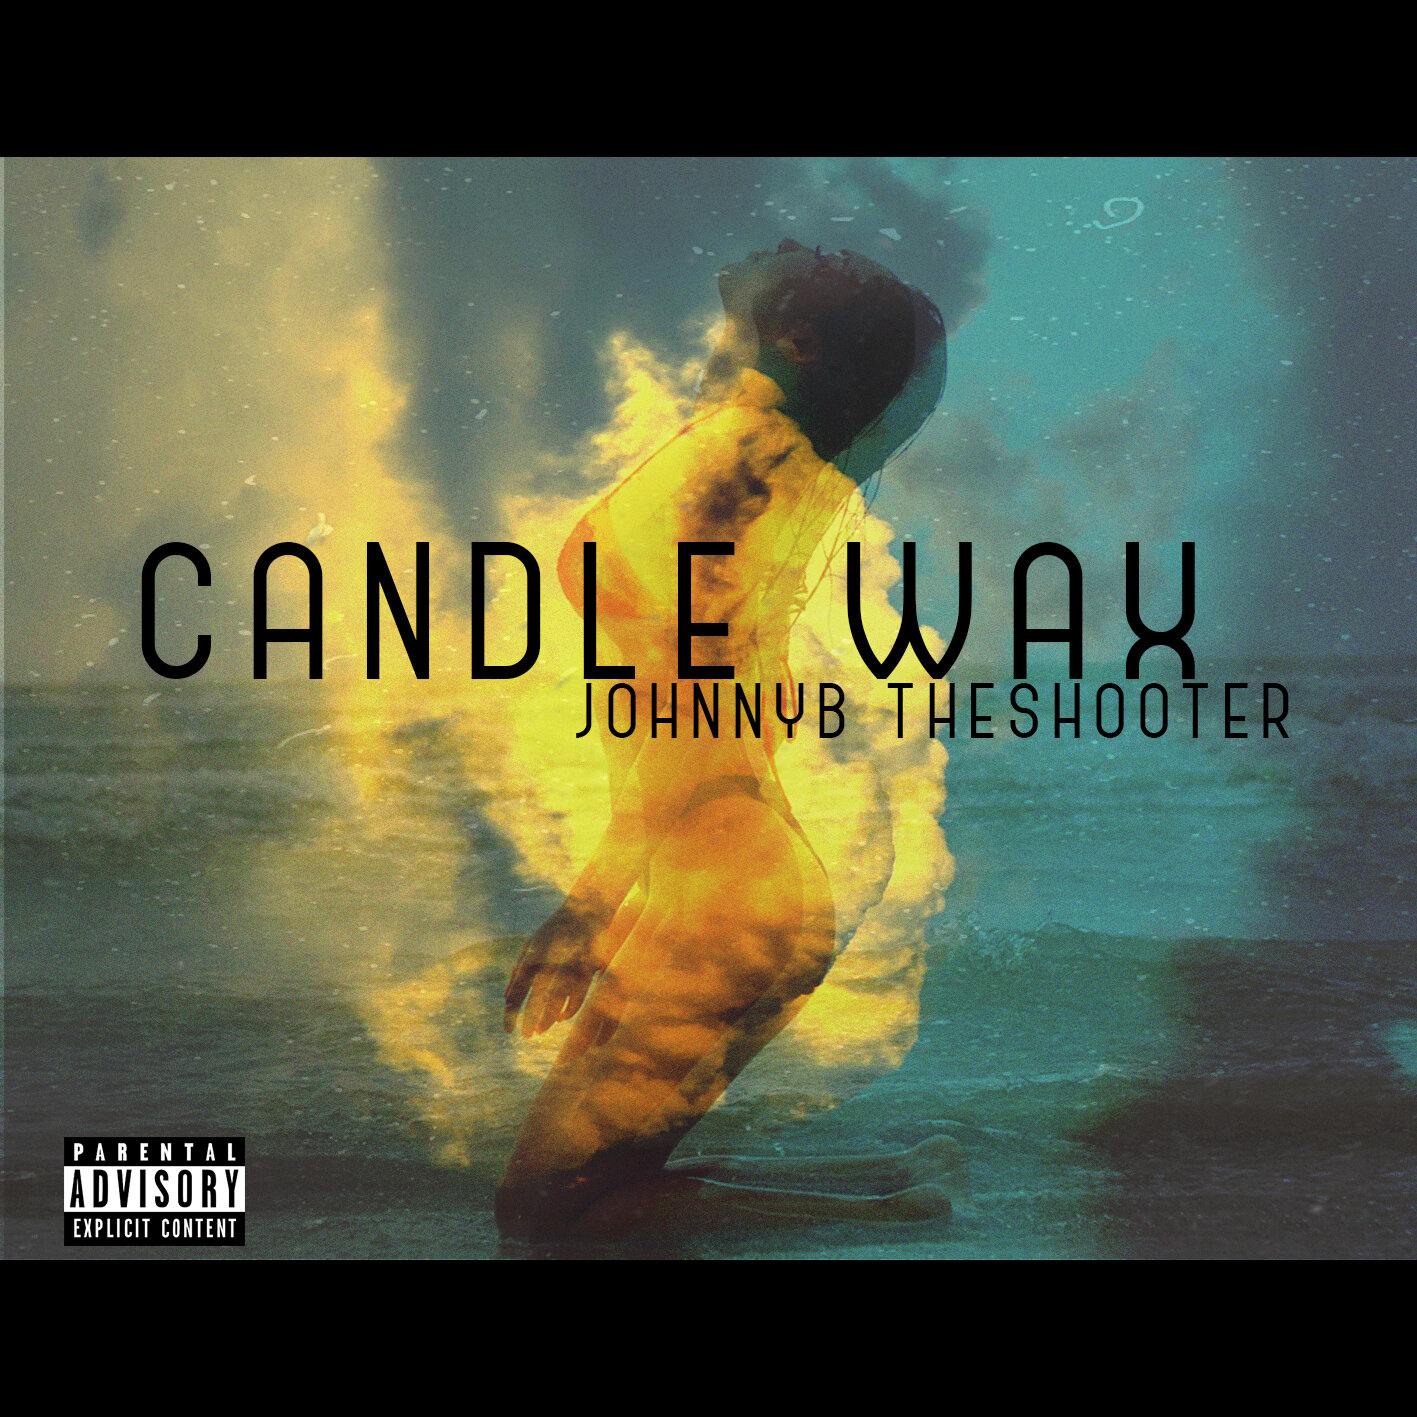 Candle Wax - JohnnyB theShooter COVER.jpg